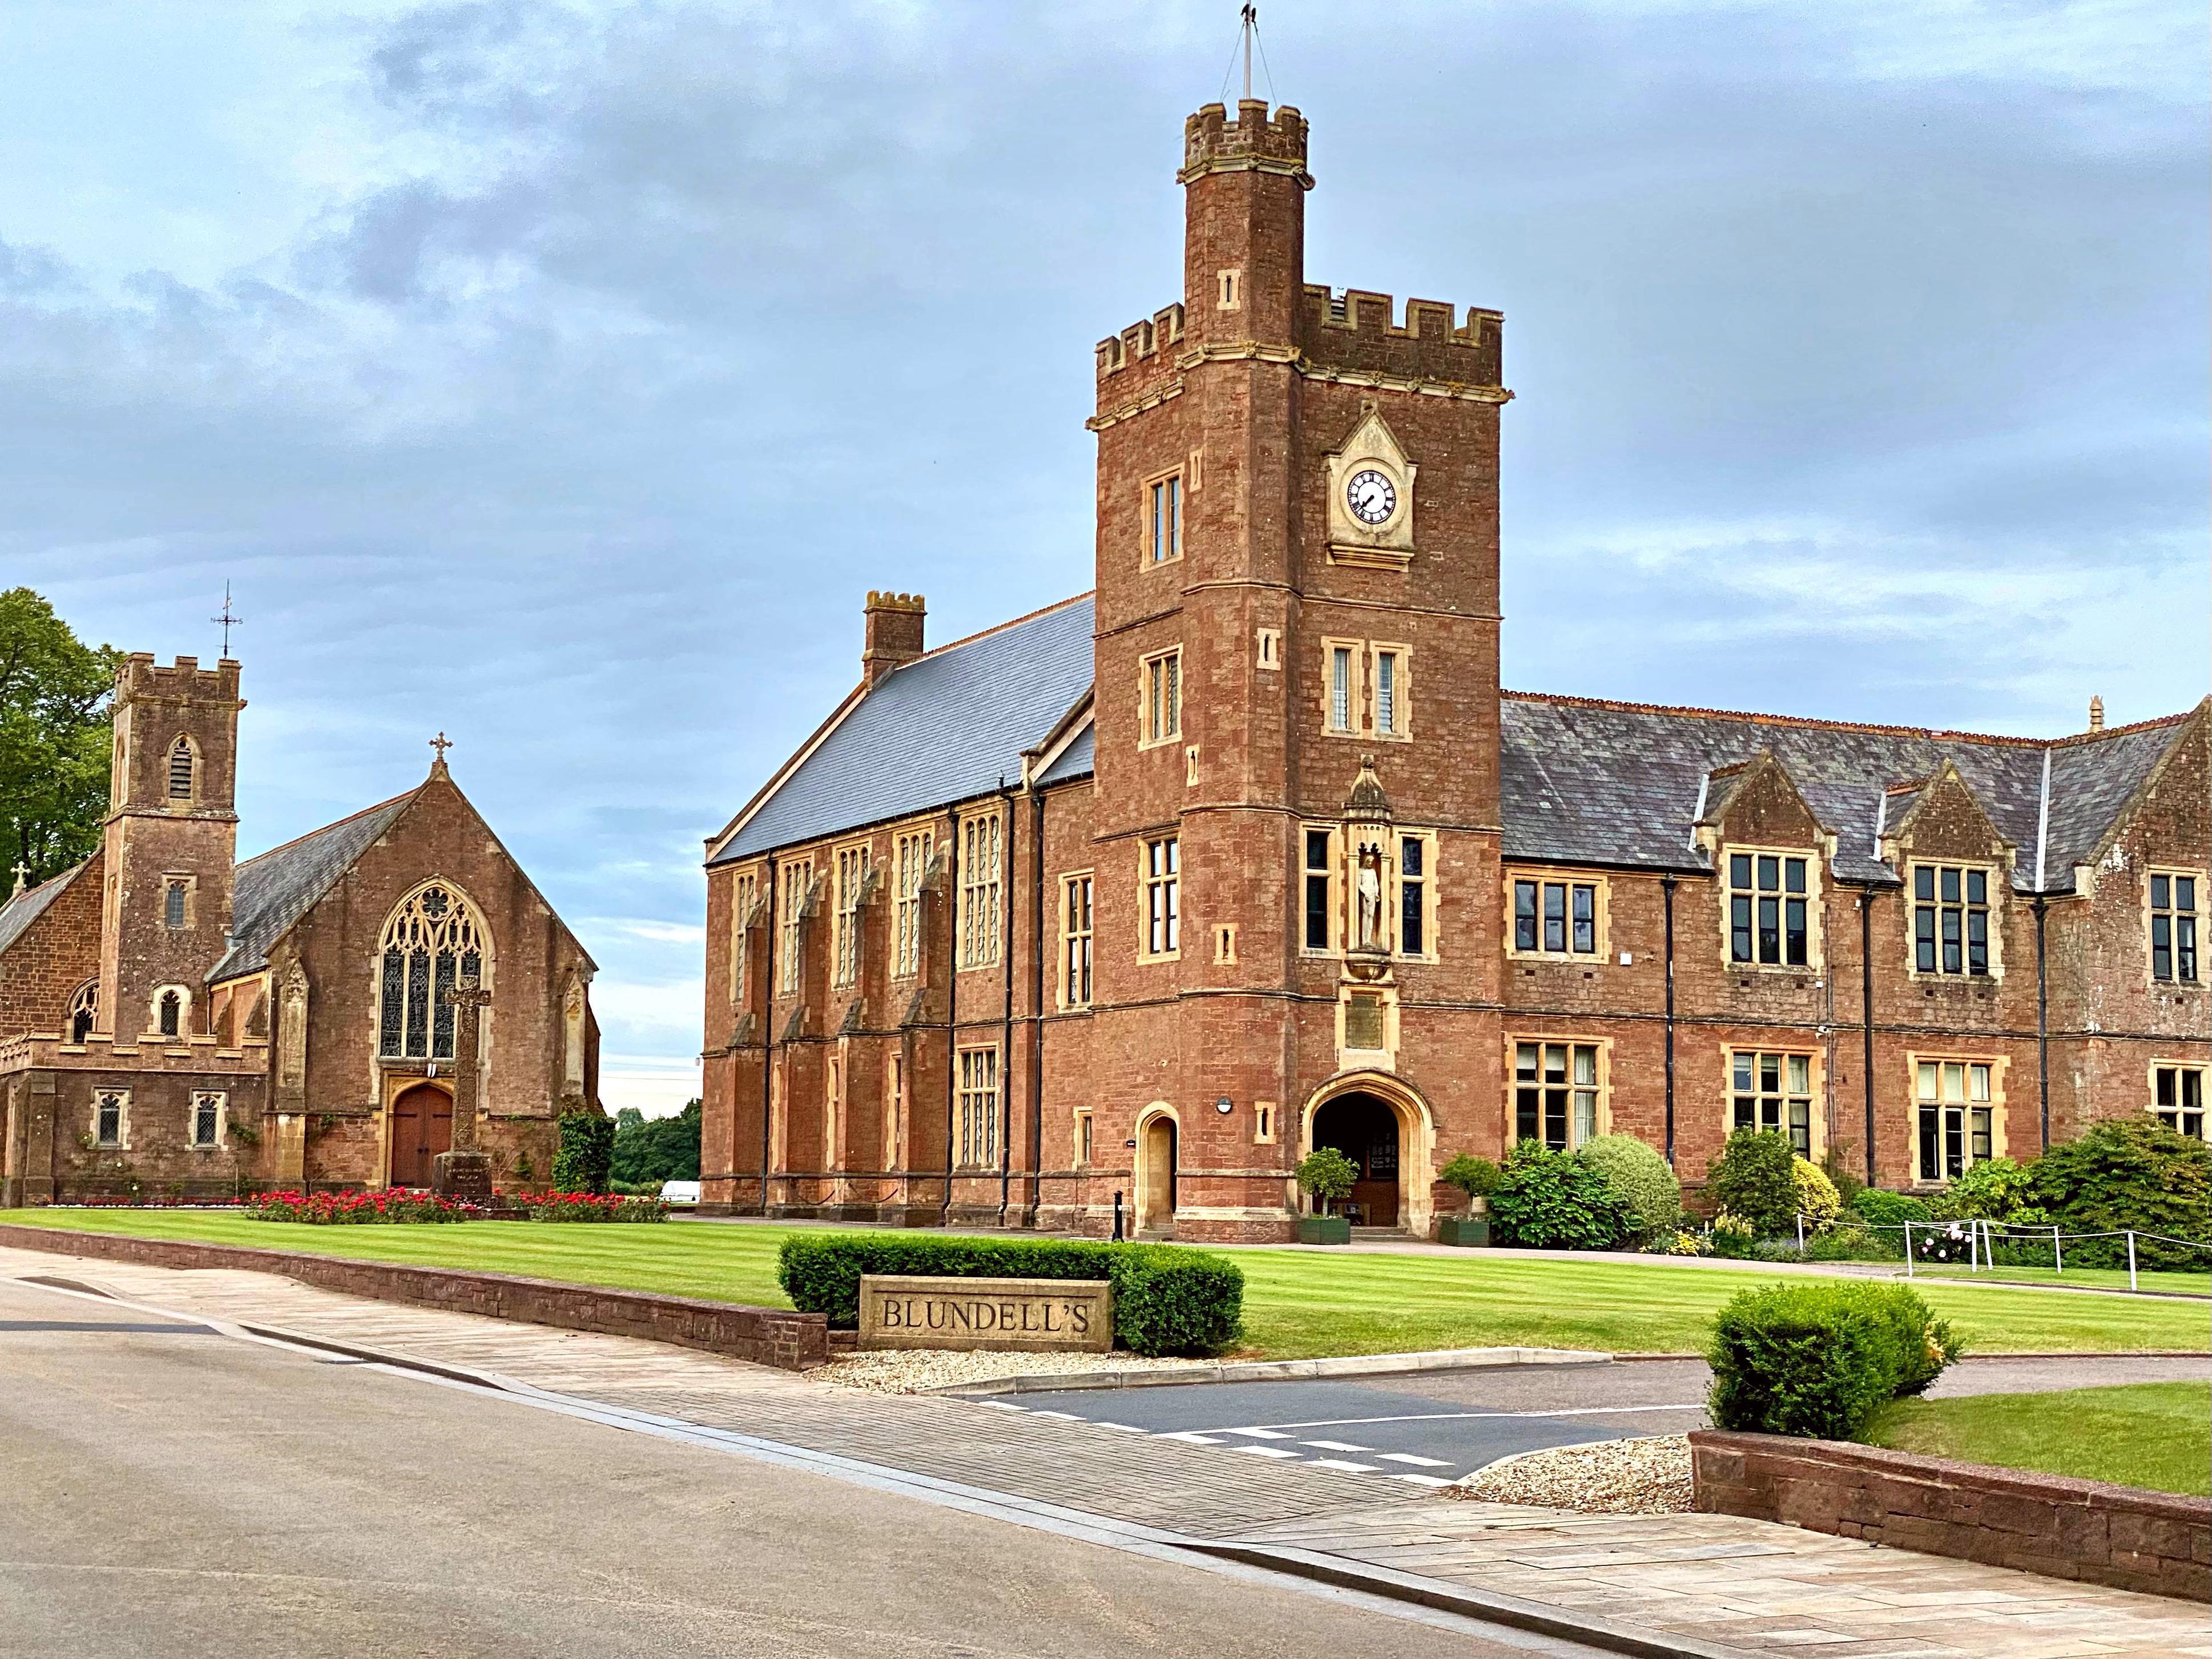 Private school Blundell’s was established in 1604